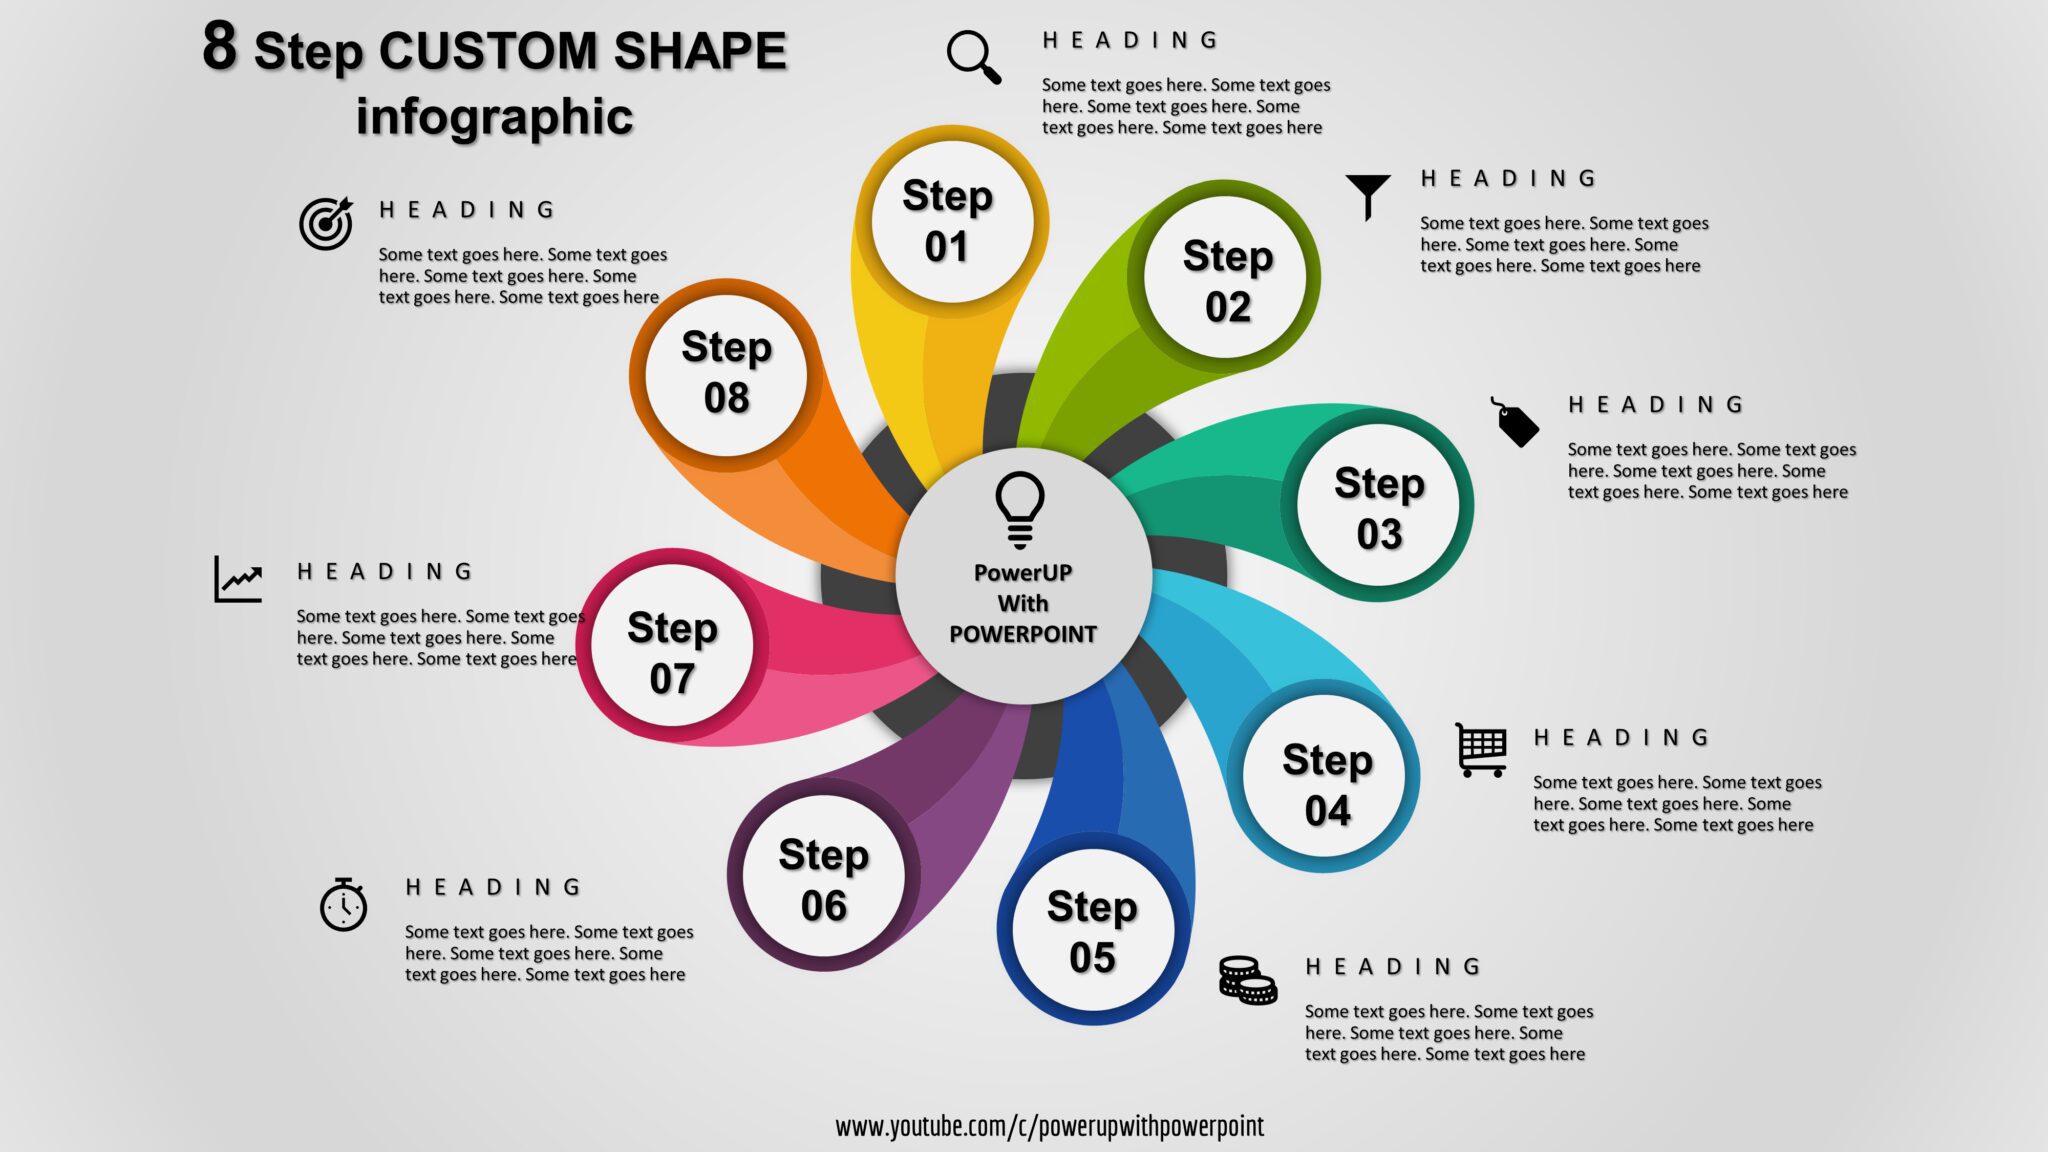 Download Powerpoint 5 Step 3d Circular Infographic 70 Powerup With Powerpoint 0175